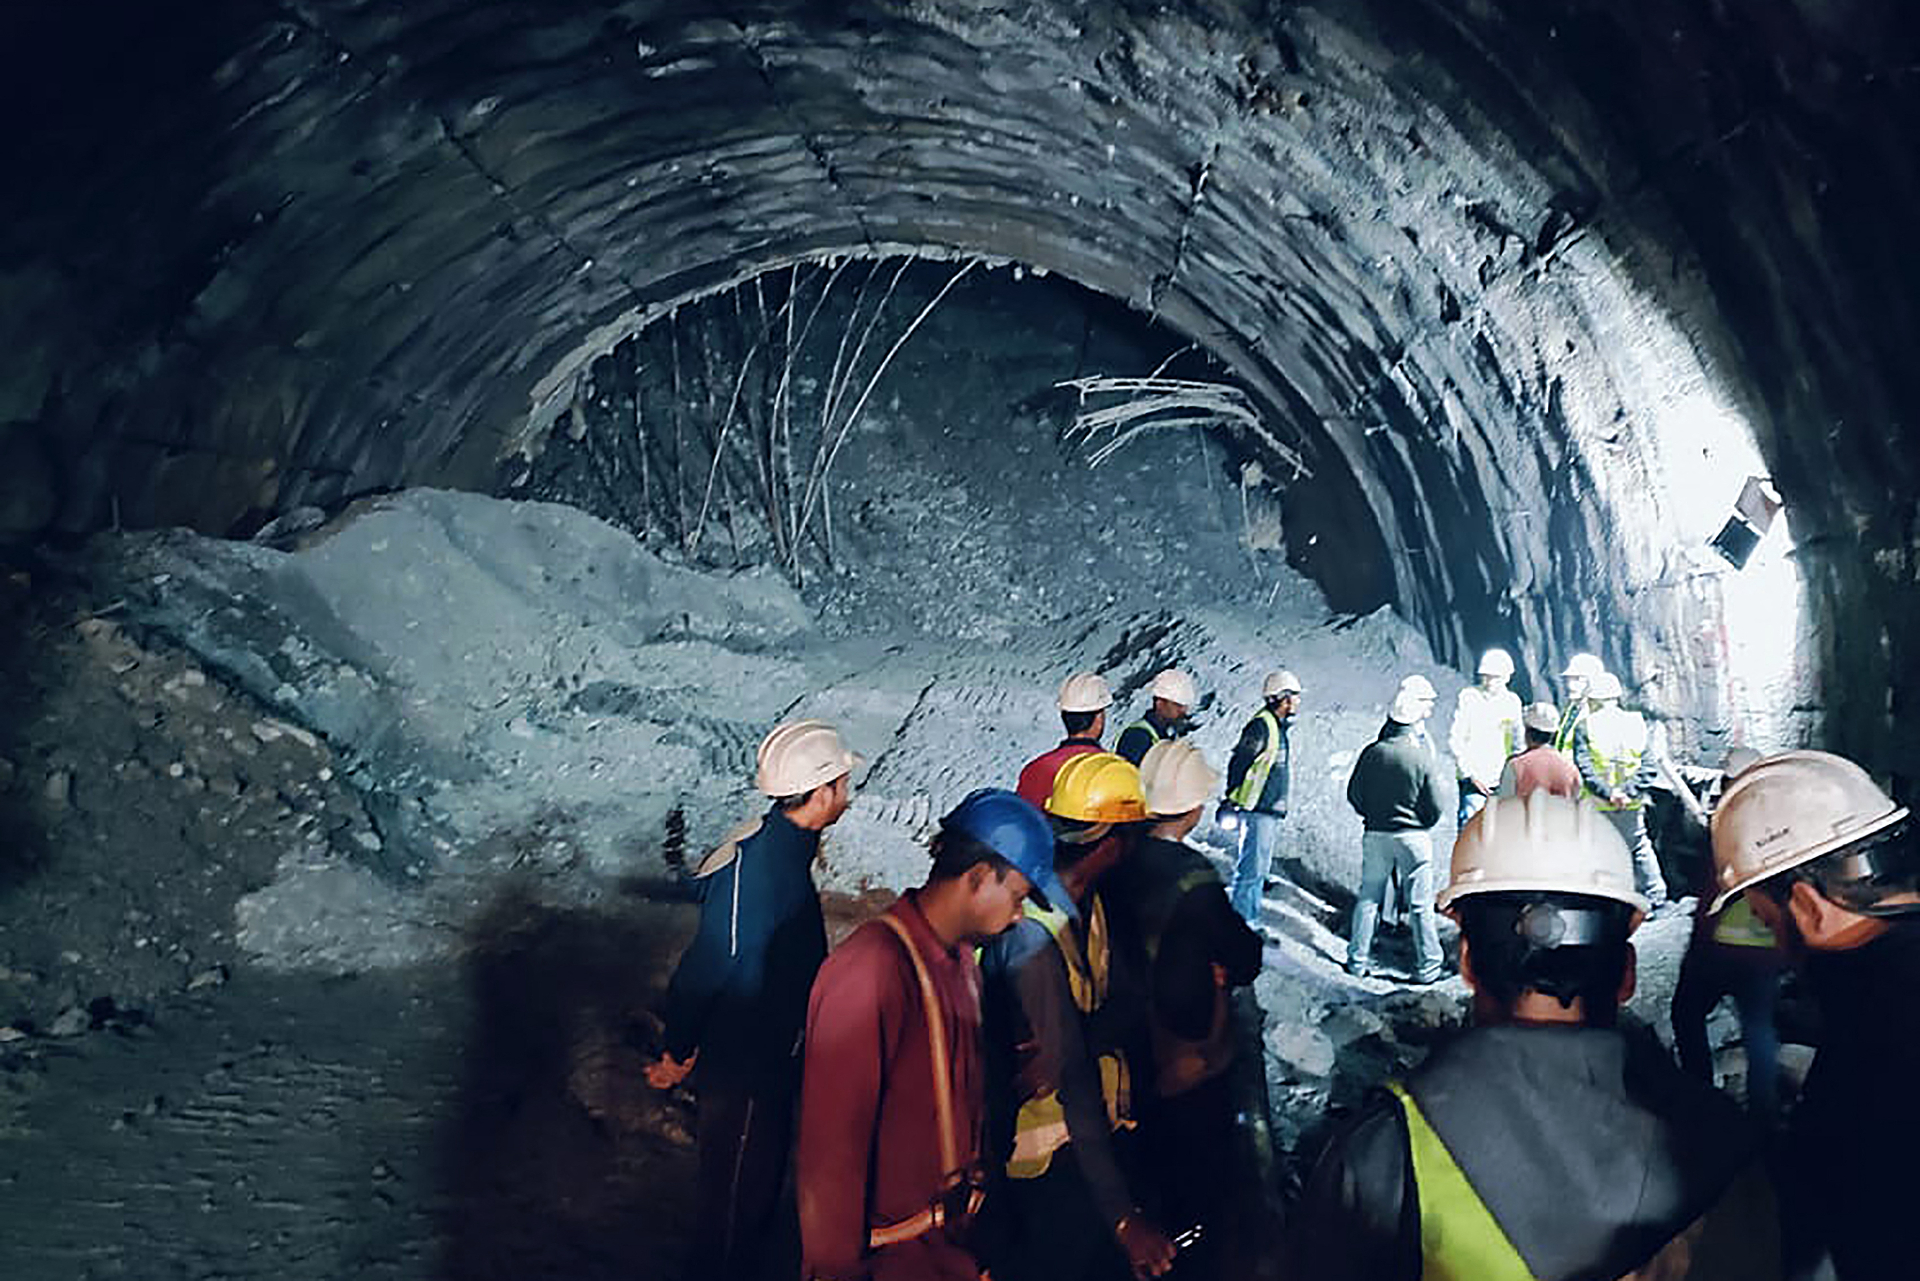 'Rat miners,' the skilled workers that rescued 41 men from a collapsed tunnel in India